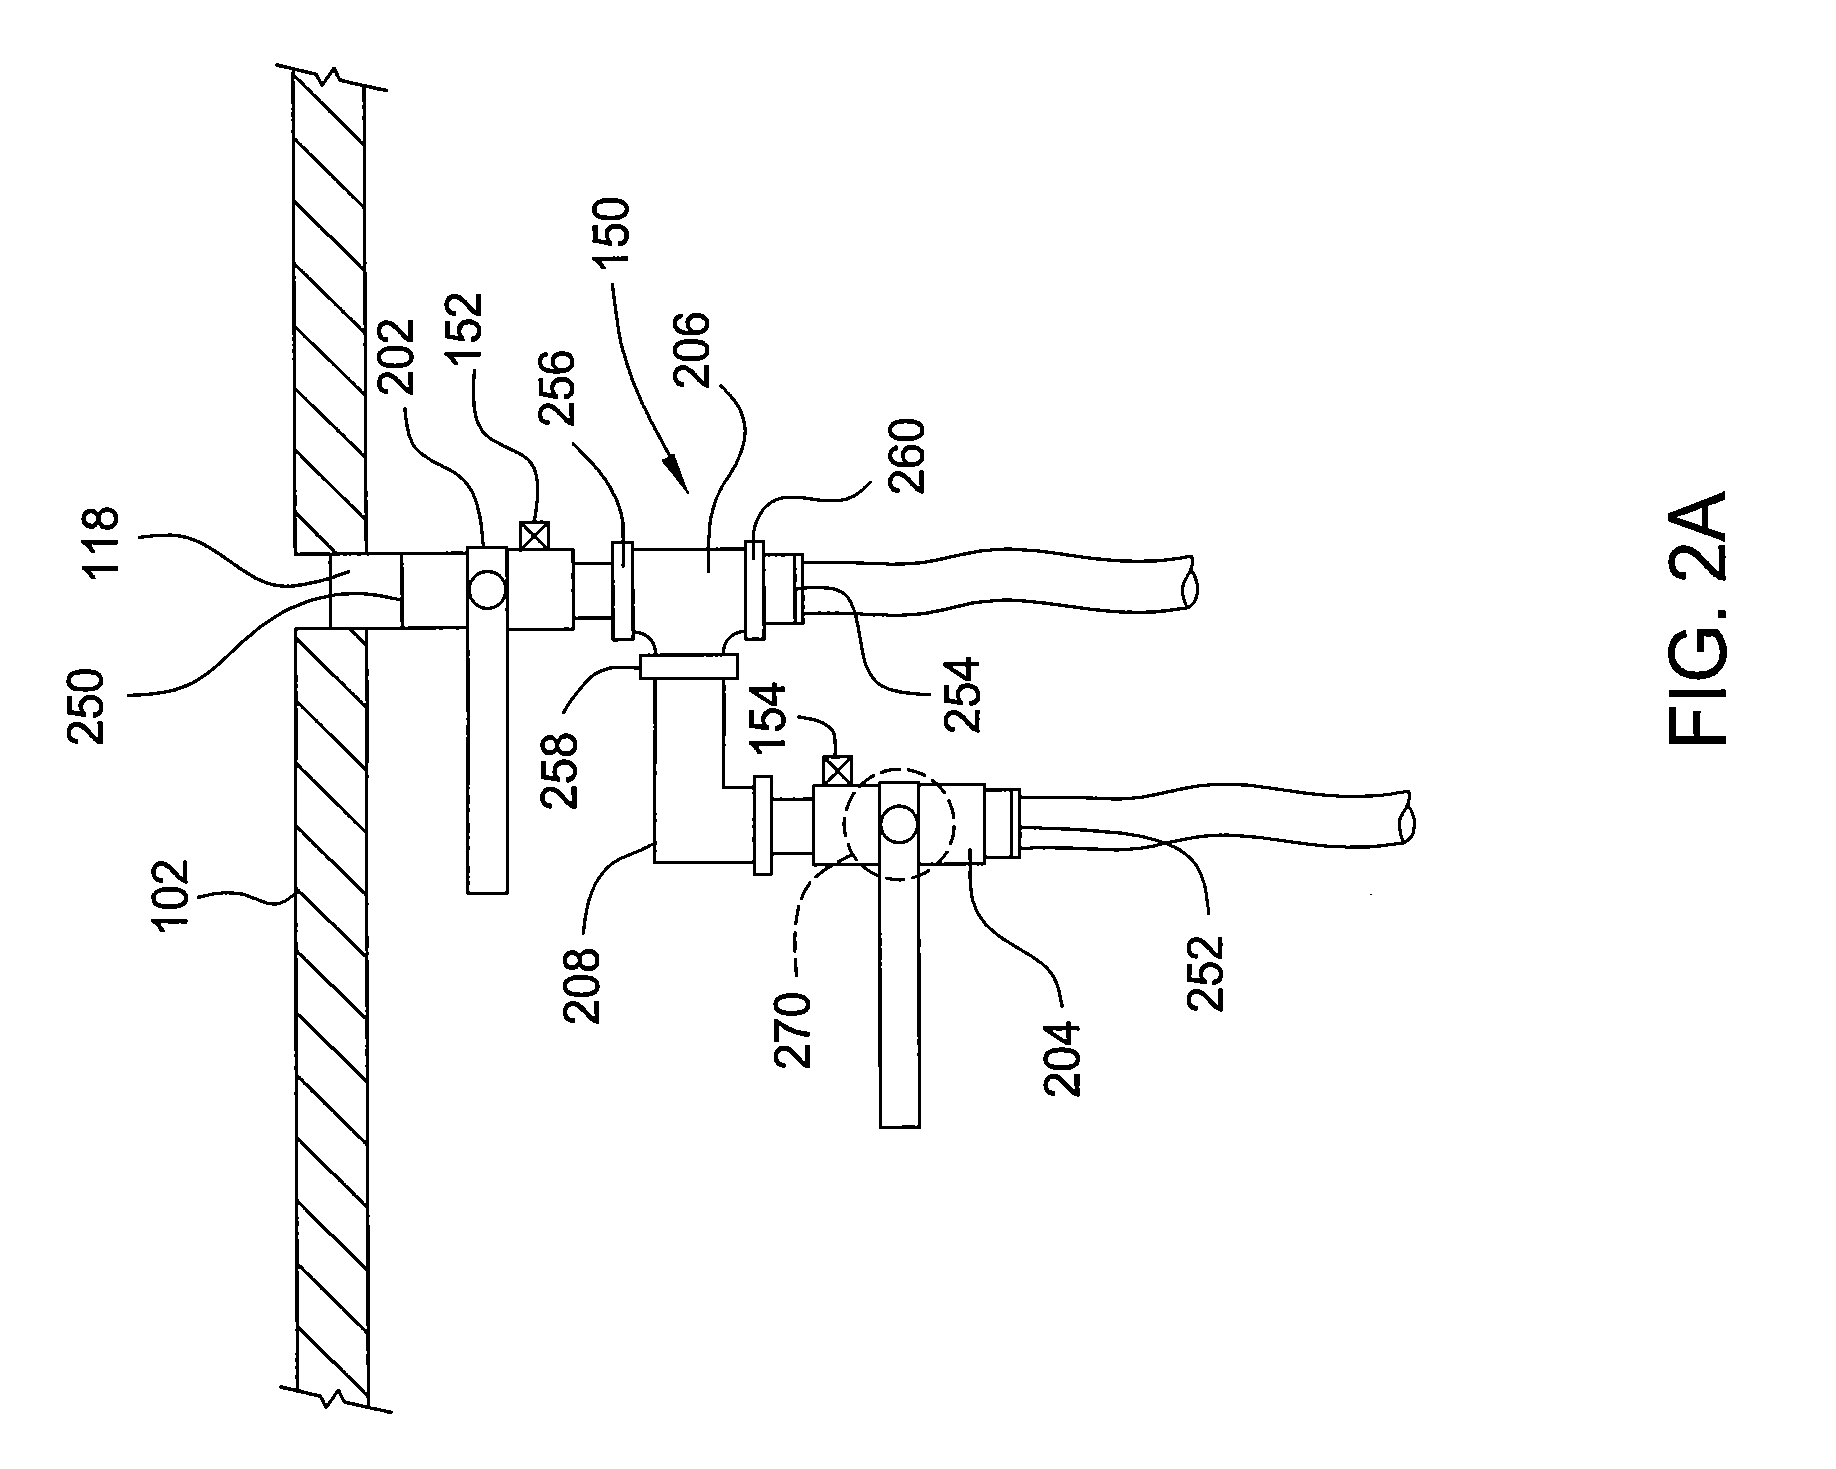 Method and apparatus for in-situ testing of filtration systems